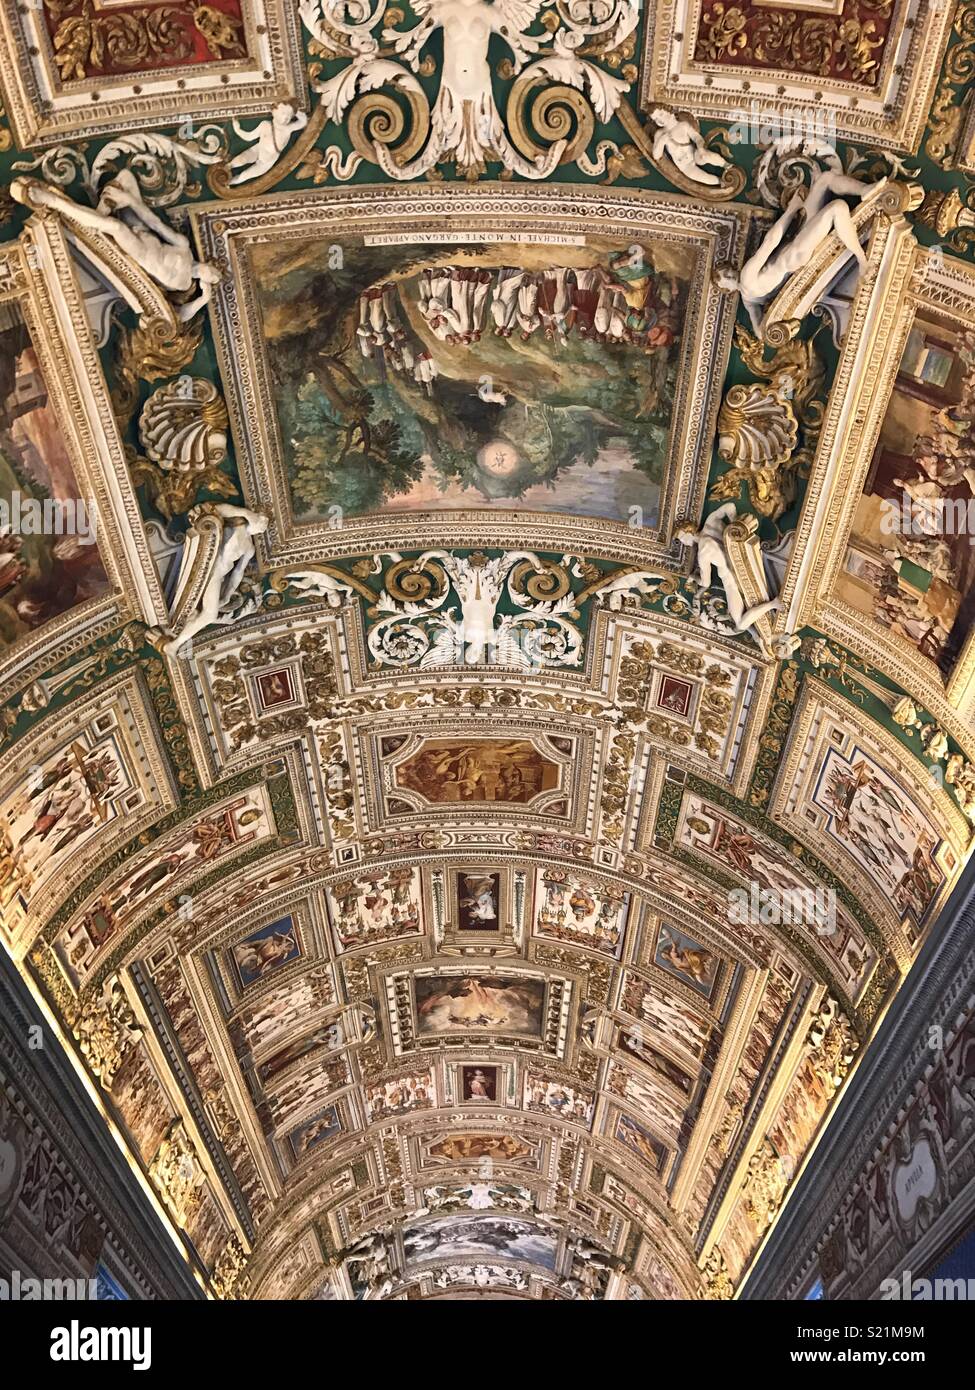 Ceiling Artwork In The Sistine Chapel Rome Italy Stock